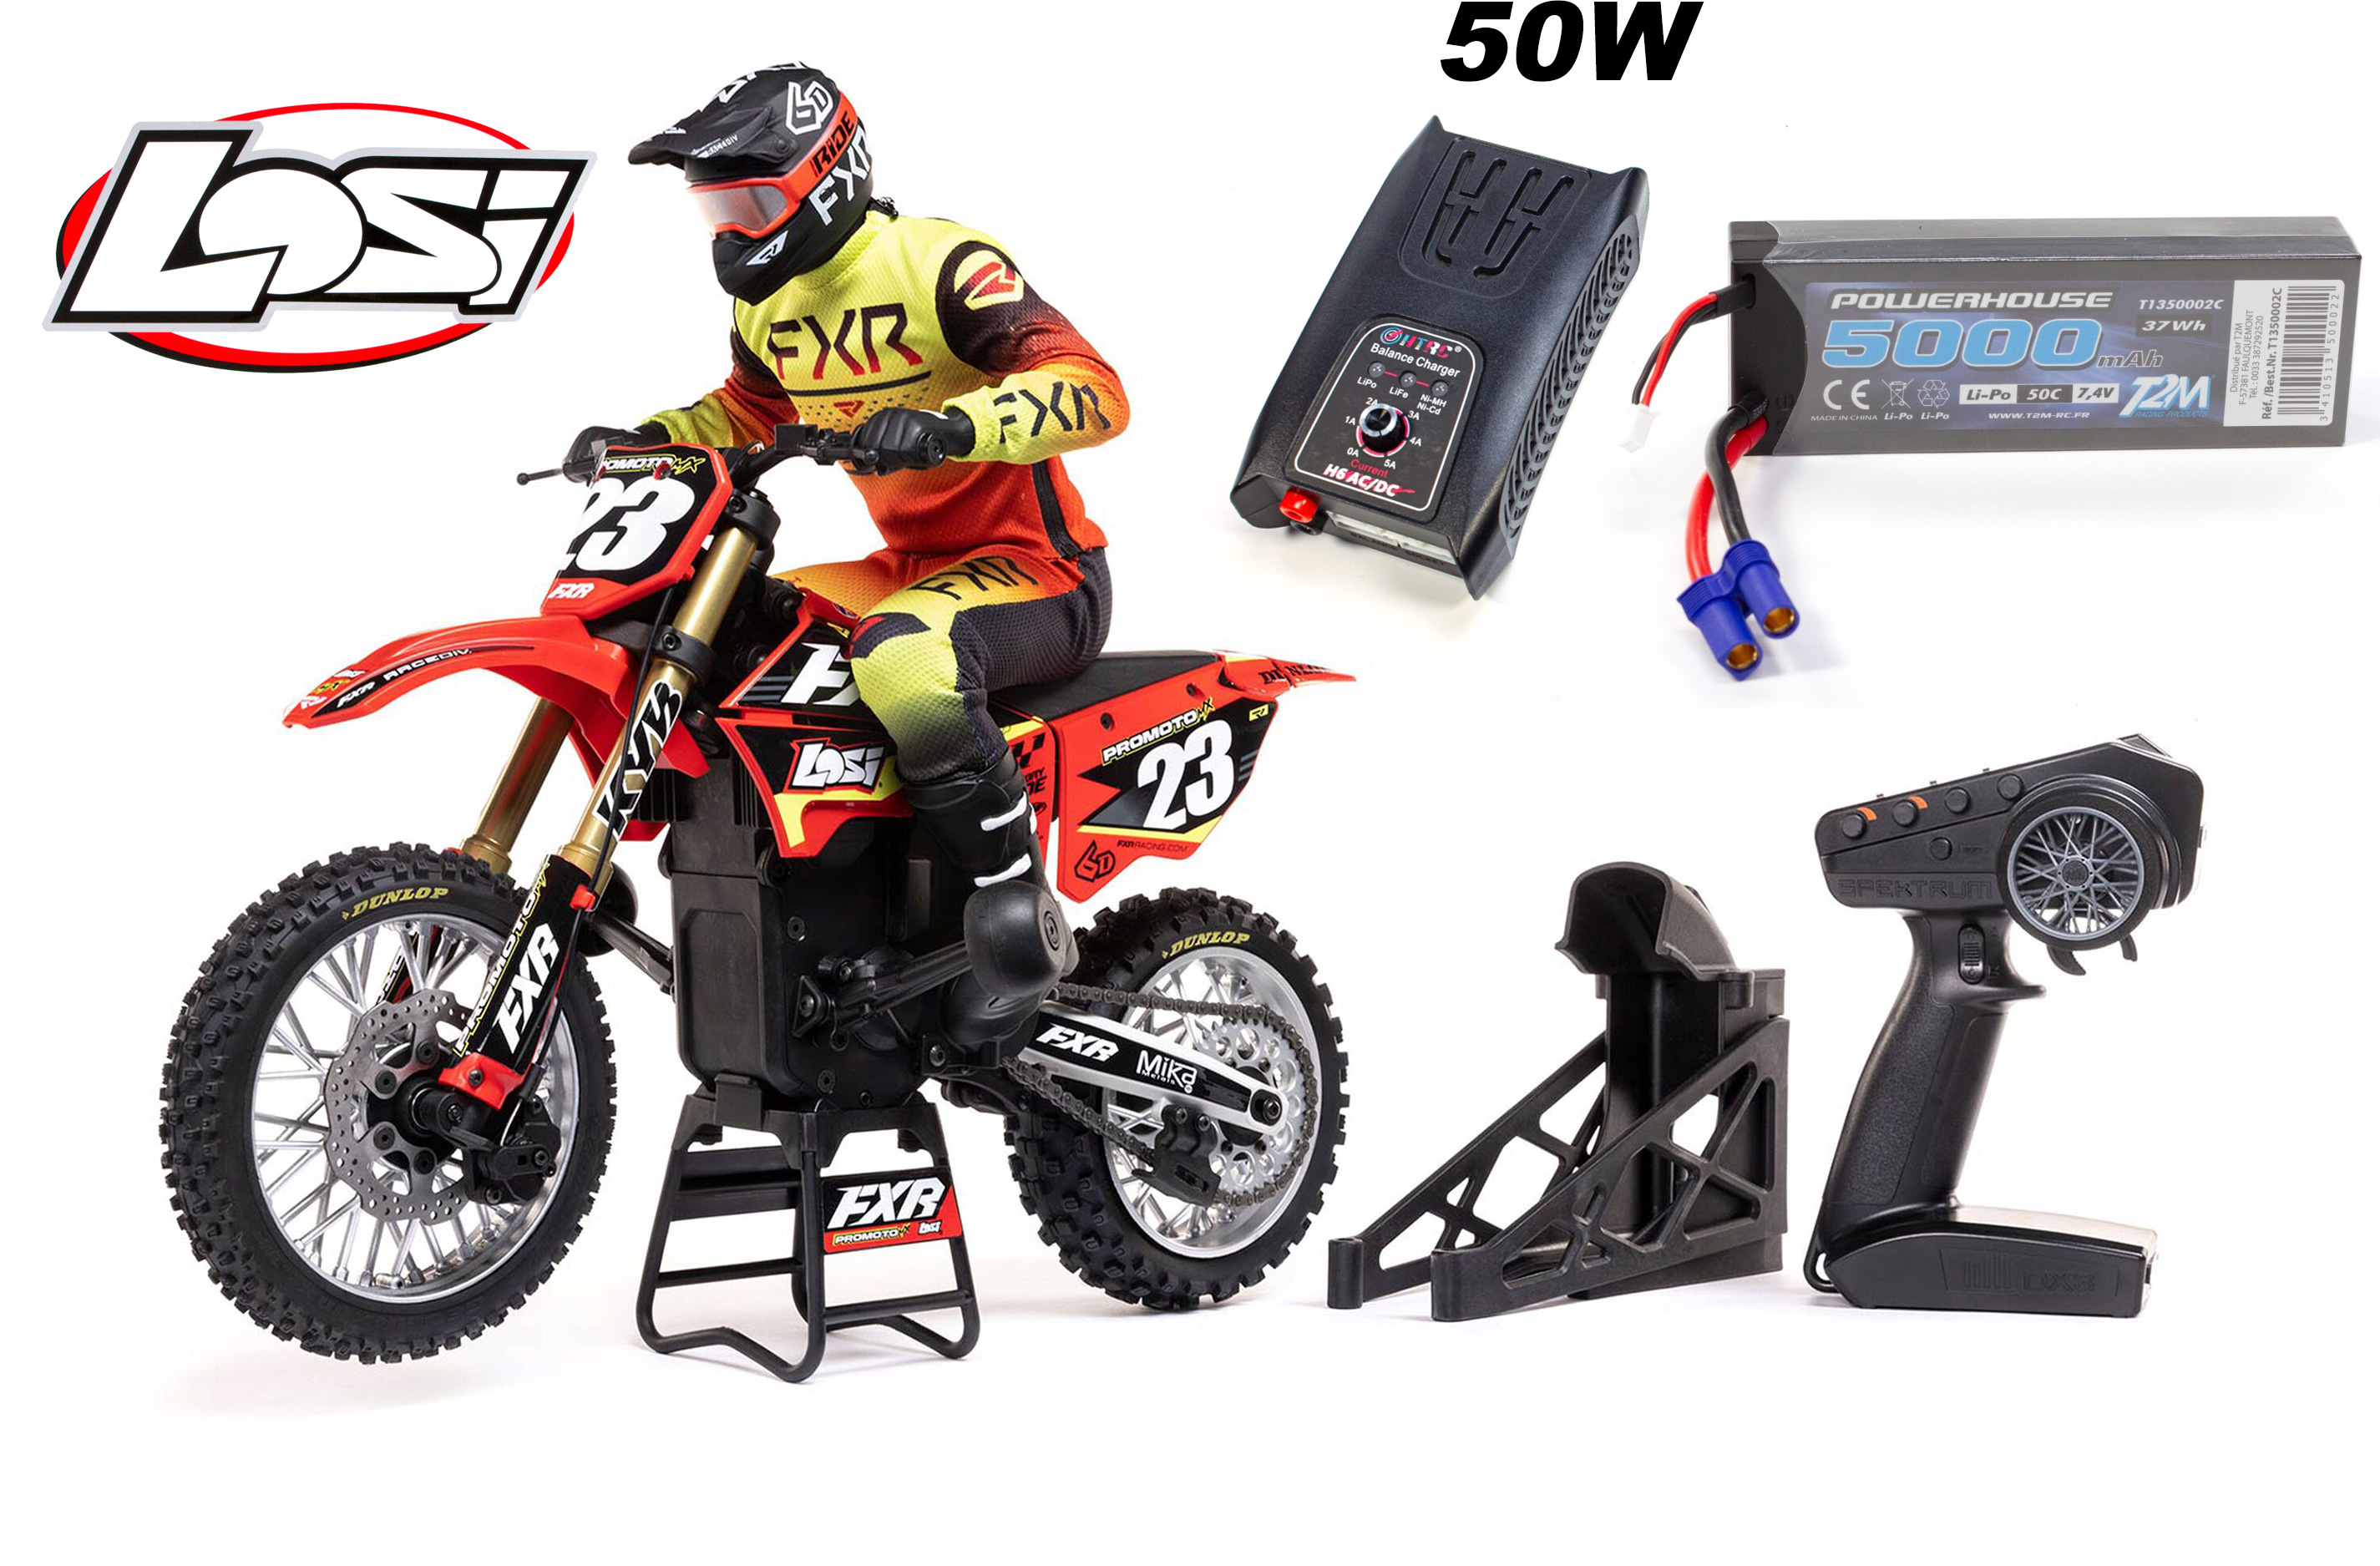 LOS06000T1 Losi 1/4 Promoto-MX Moto RTR with Battery and Charger 50W, FXR